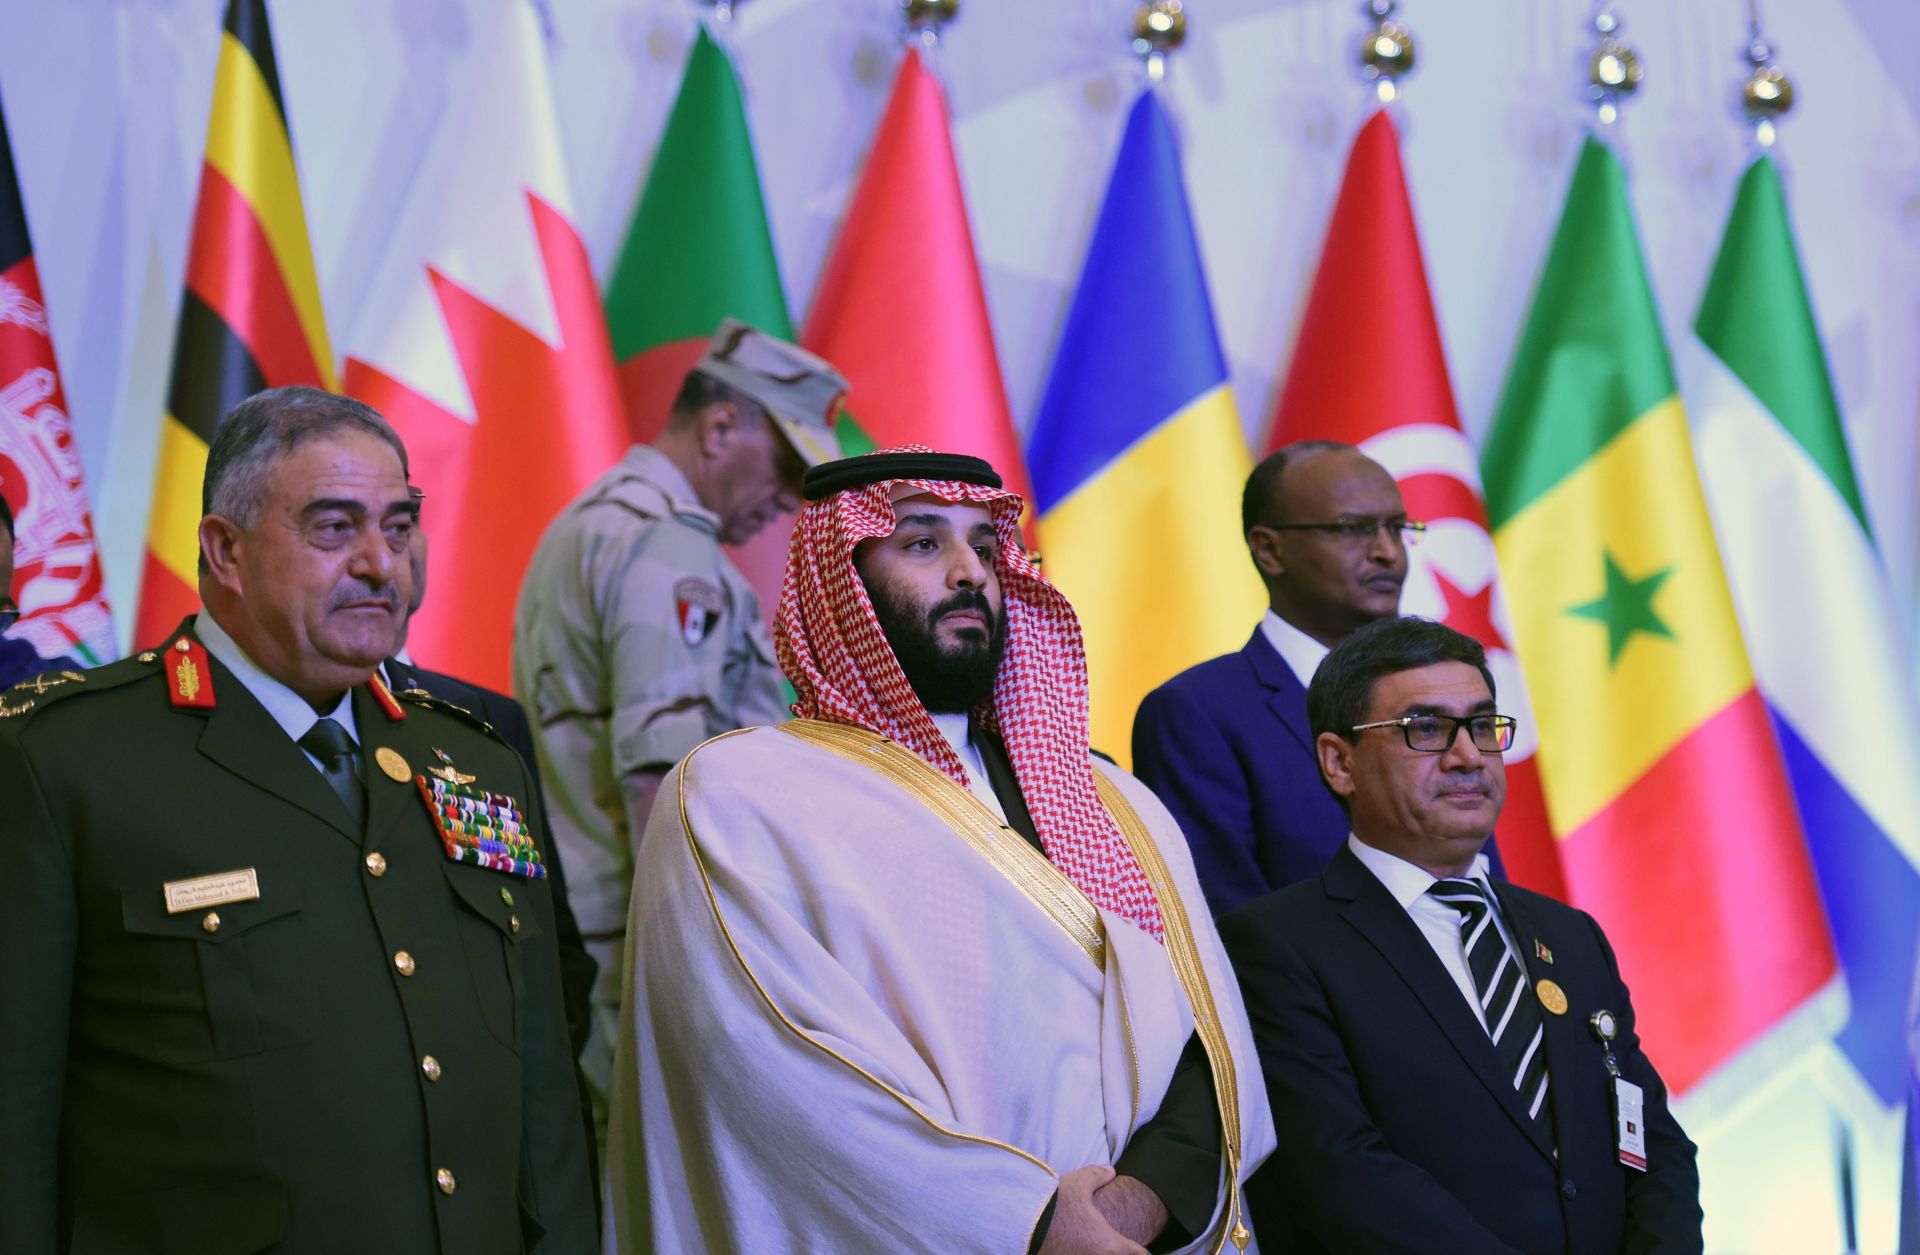 Saudi Defense Minister and Crown Prince Mohammed bin Salman, center, stands for a photo-op with his counterparts from other countries in Saudi Arabia's Islamic Military Counterterrorism Coalition at a meeting in Riyadh.